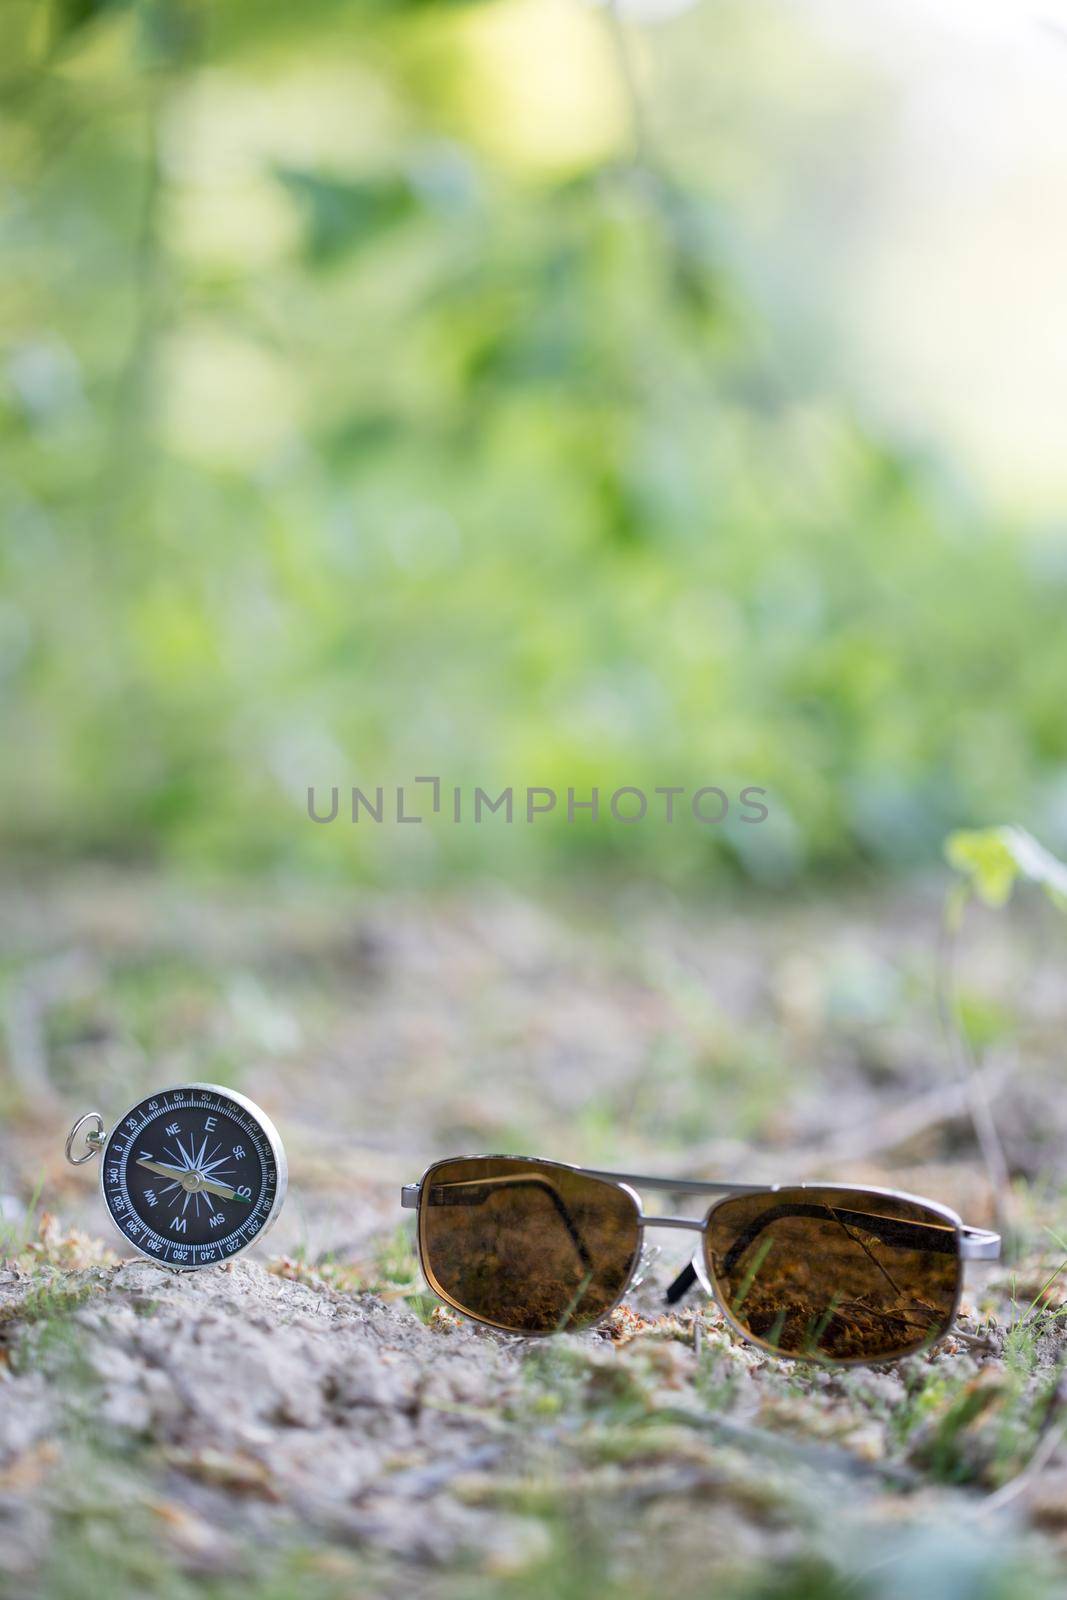 Vintage compass and sunglasses lying on the floor. Adventure and discovery concept.